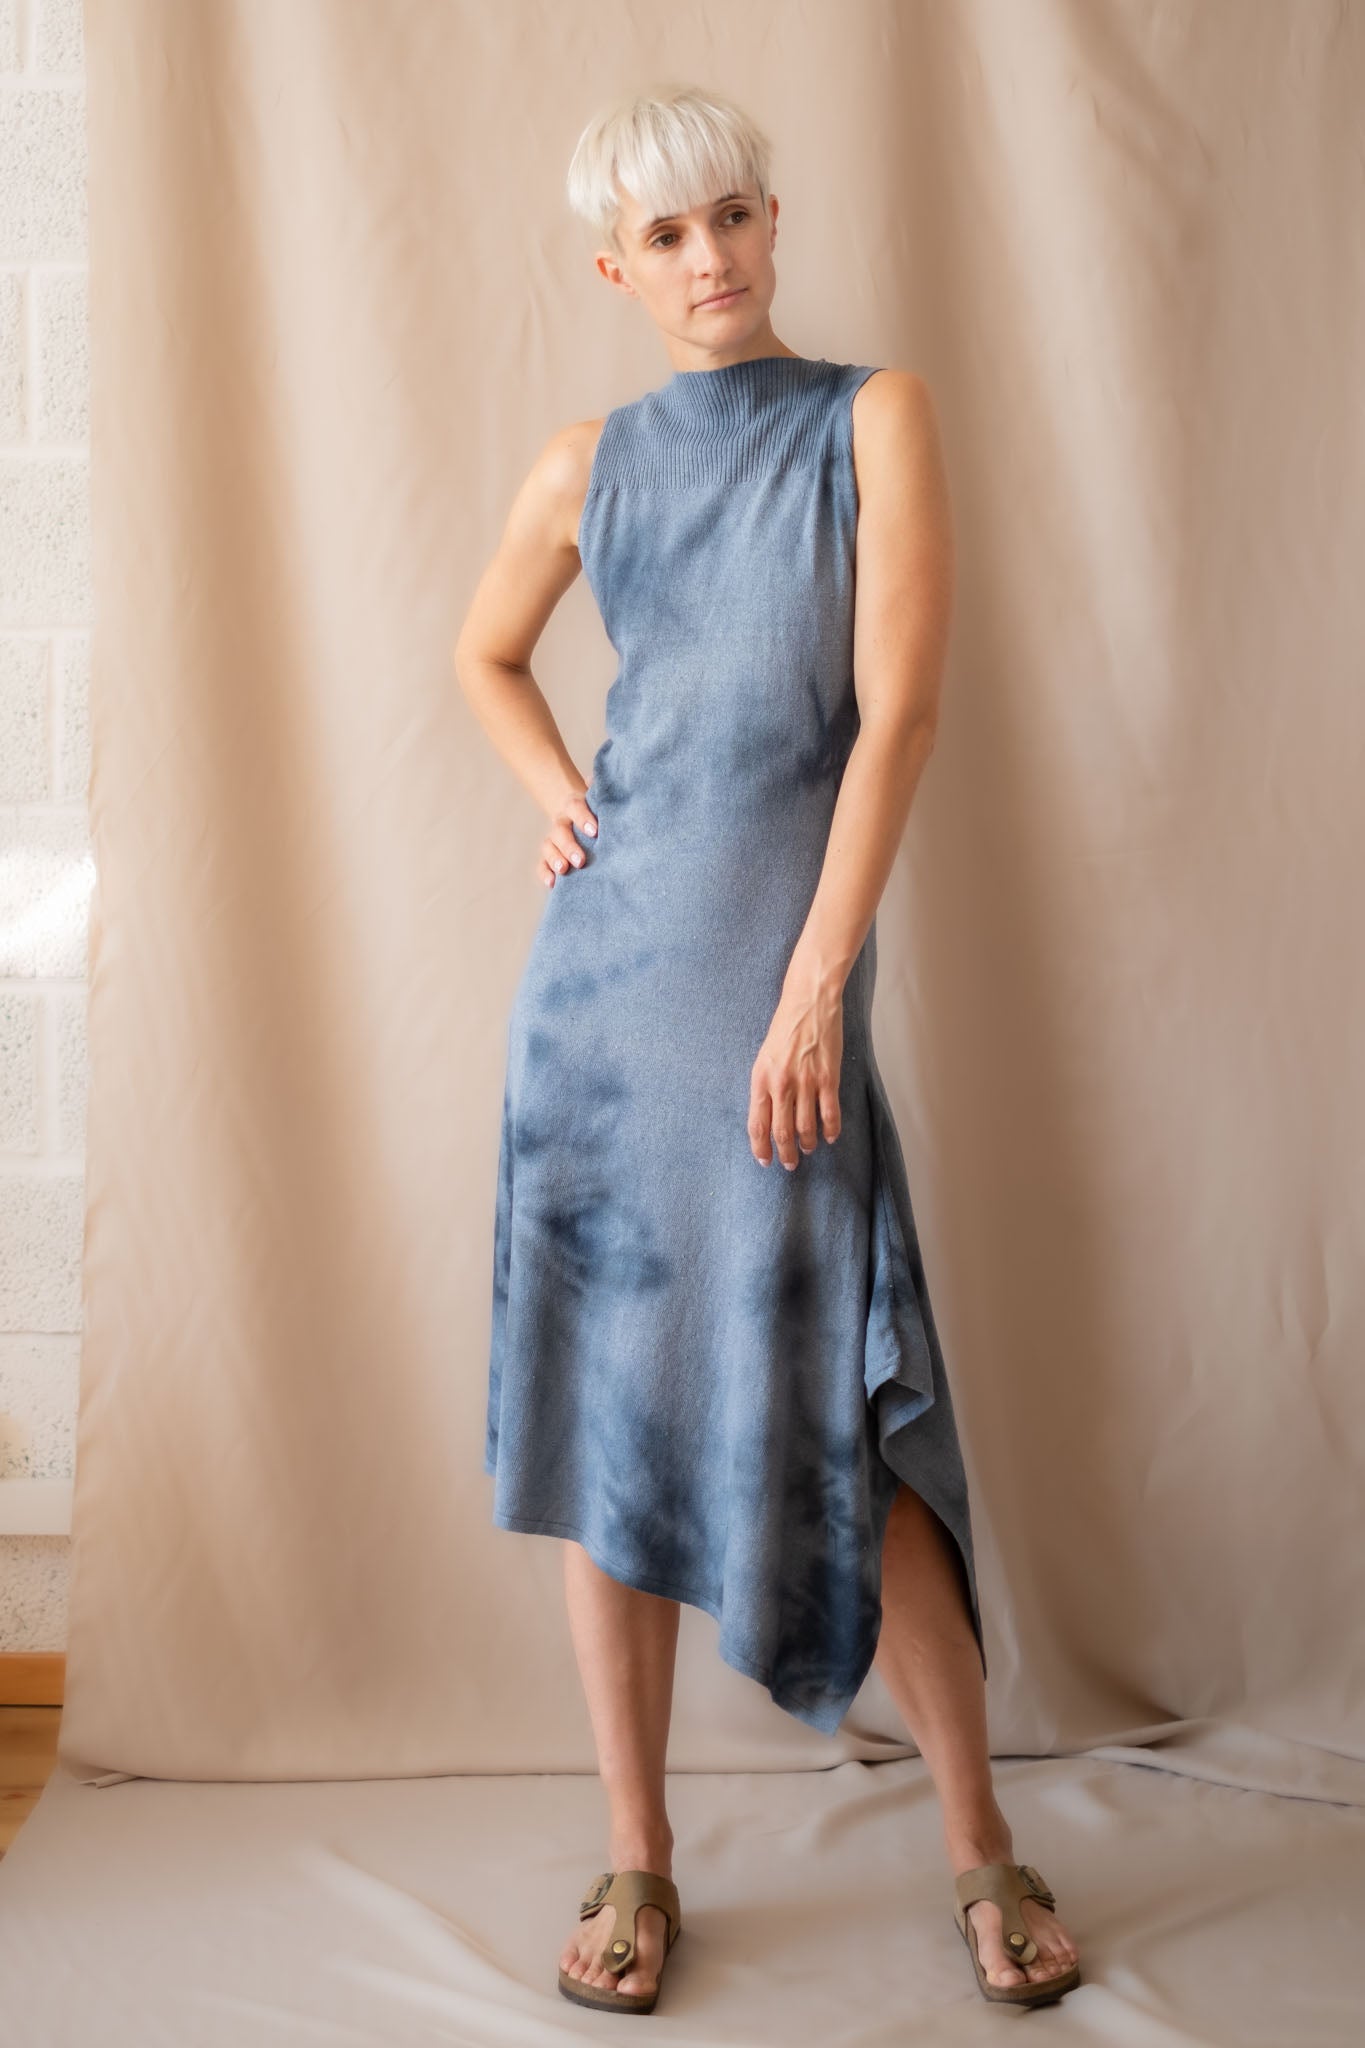 Knitted dress from recycled denim | Blue tie-dye